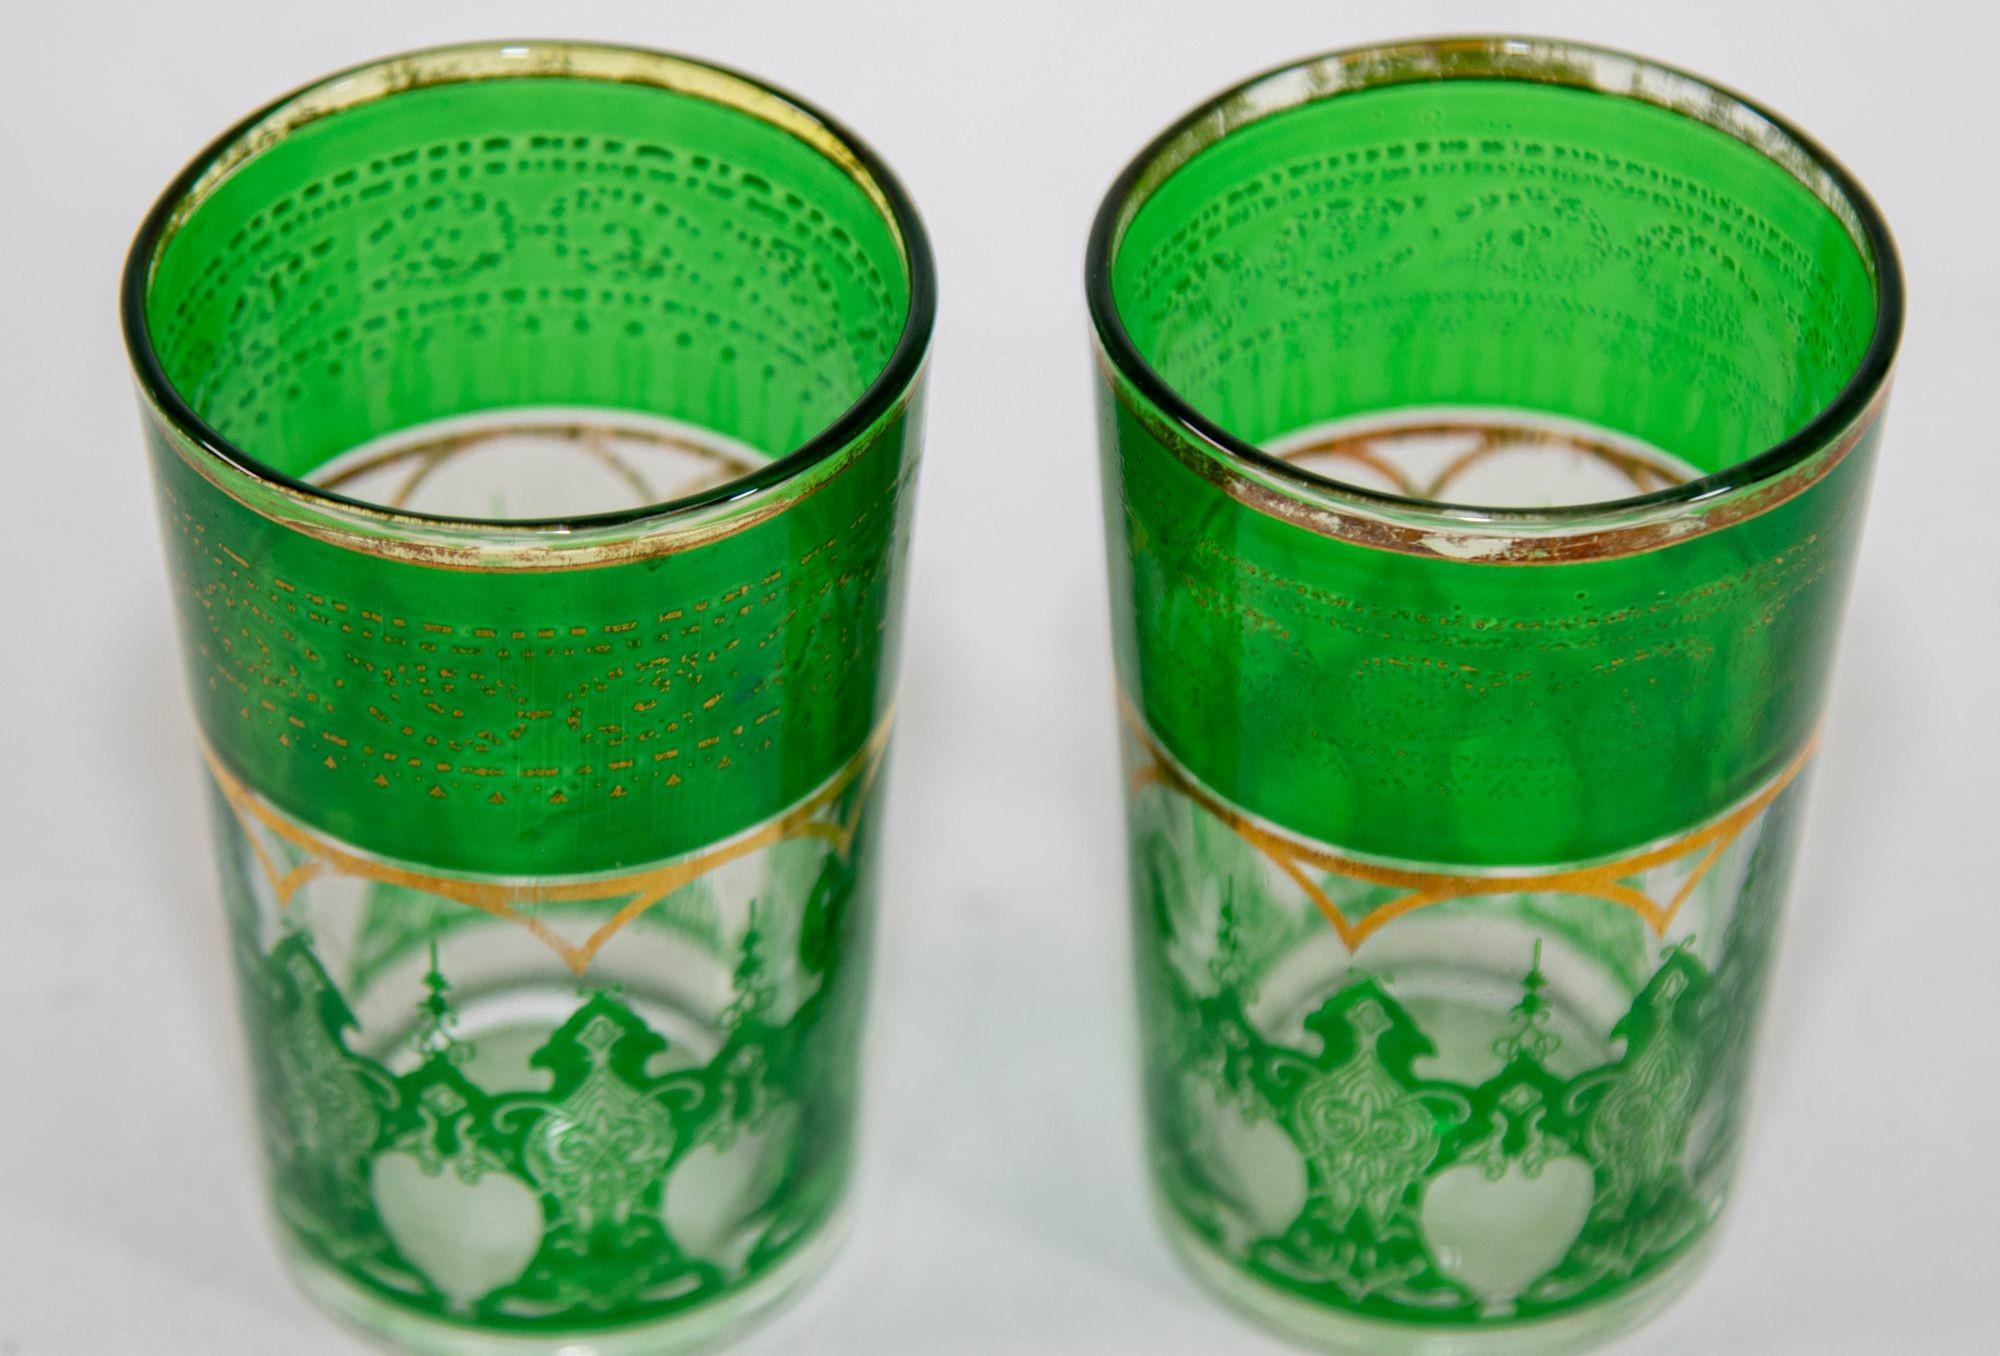 Moroccan Drinking Glasses Set of 2 with Moorish Design Vintage Barware.
Set of two Moroccan emerald green glasses with gold raised Moorish design.
Decorated with a classical gold and pattern Moorish frieze.
Use these elegant vintage glasses for